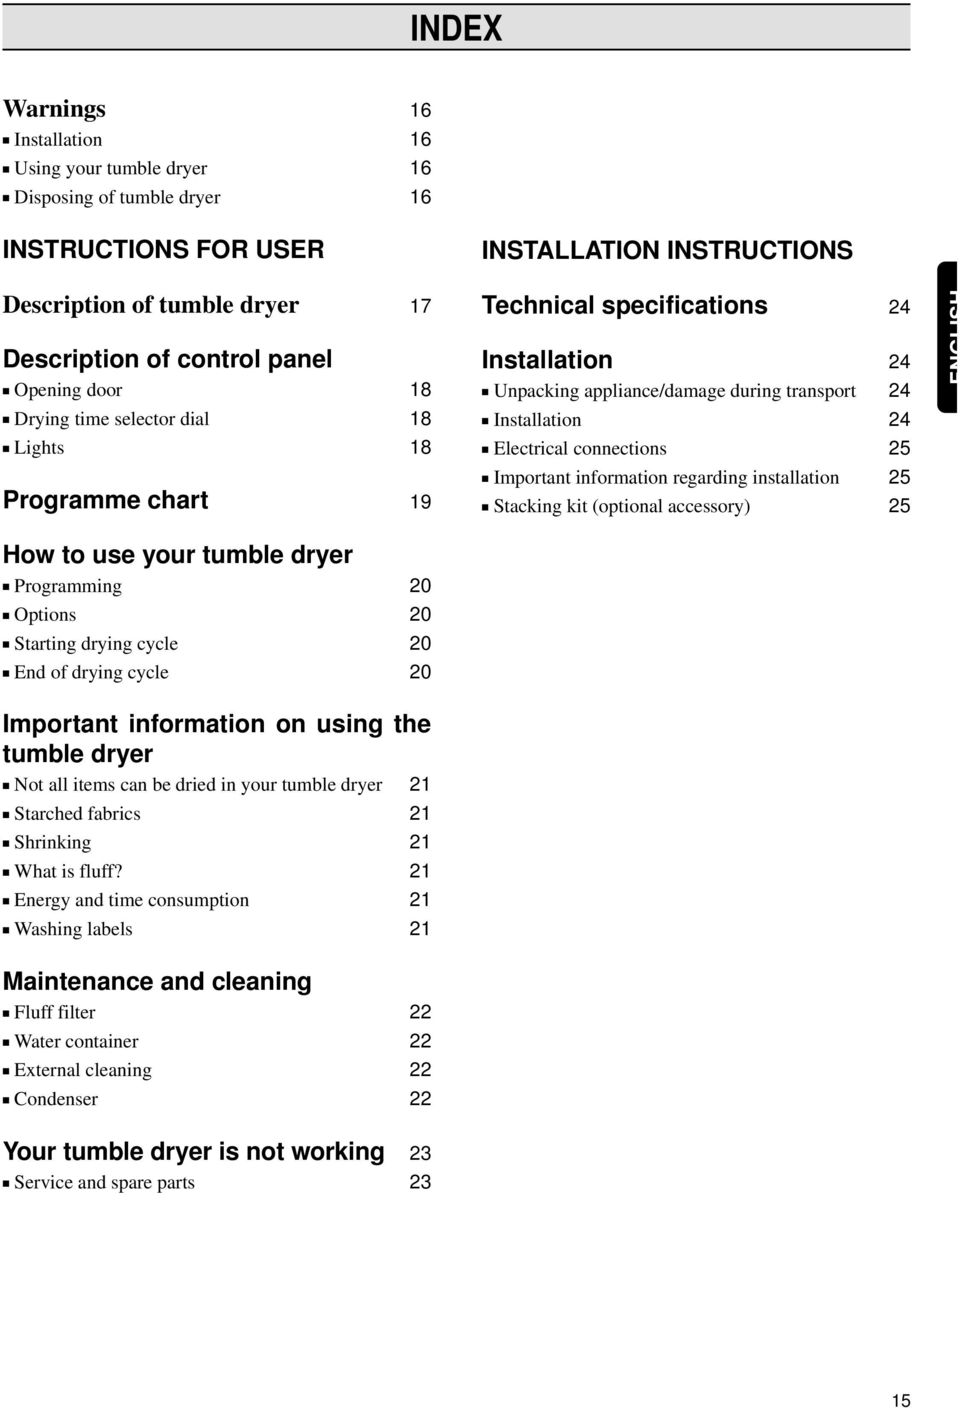 dryer Programming 20 Options 20 Starting drying cycle 20 End of drying cycle 20 Installation 24 Electrical connections 25 Important information regarding installation 25 Stacking kit (optional